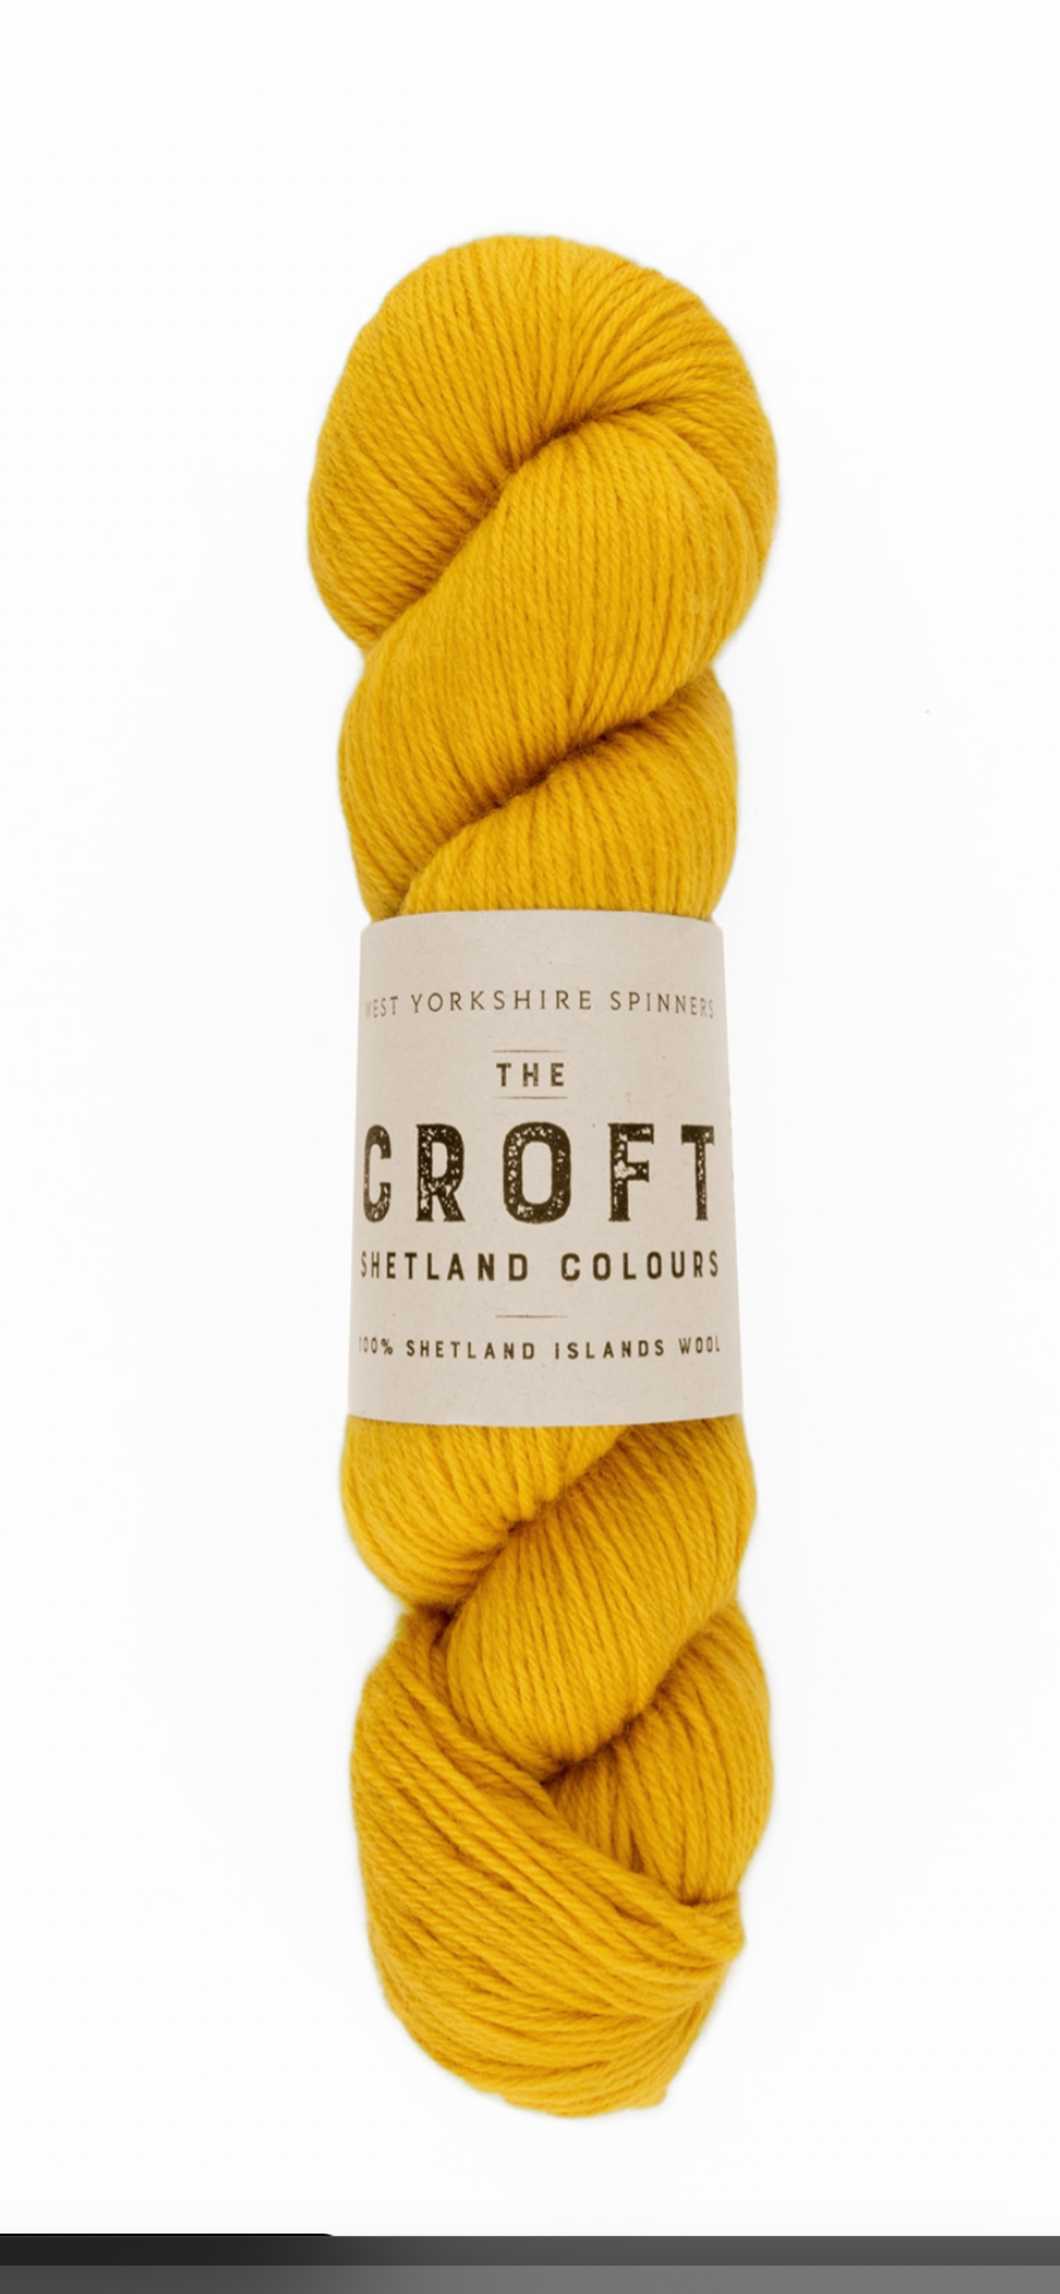 The Croft - Shetland DK- West Yorkshire Spinners